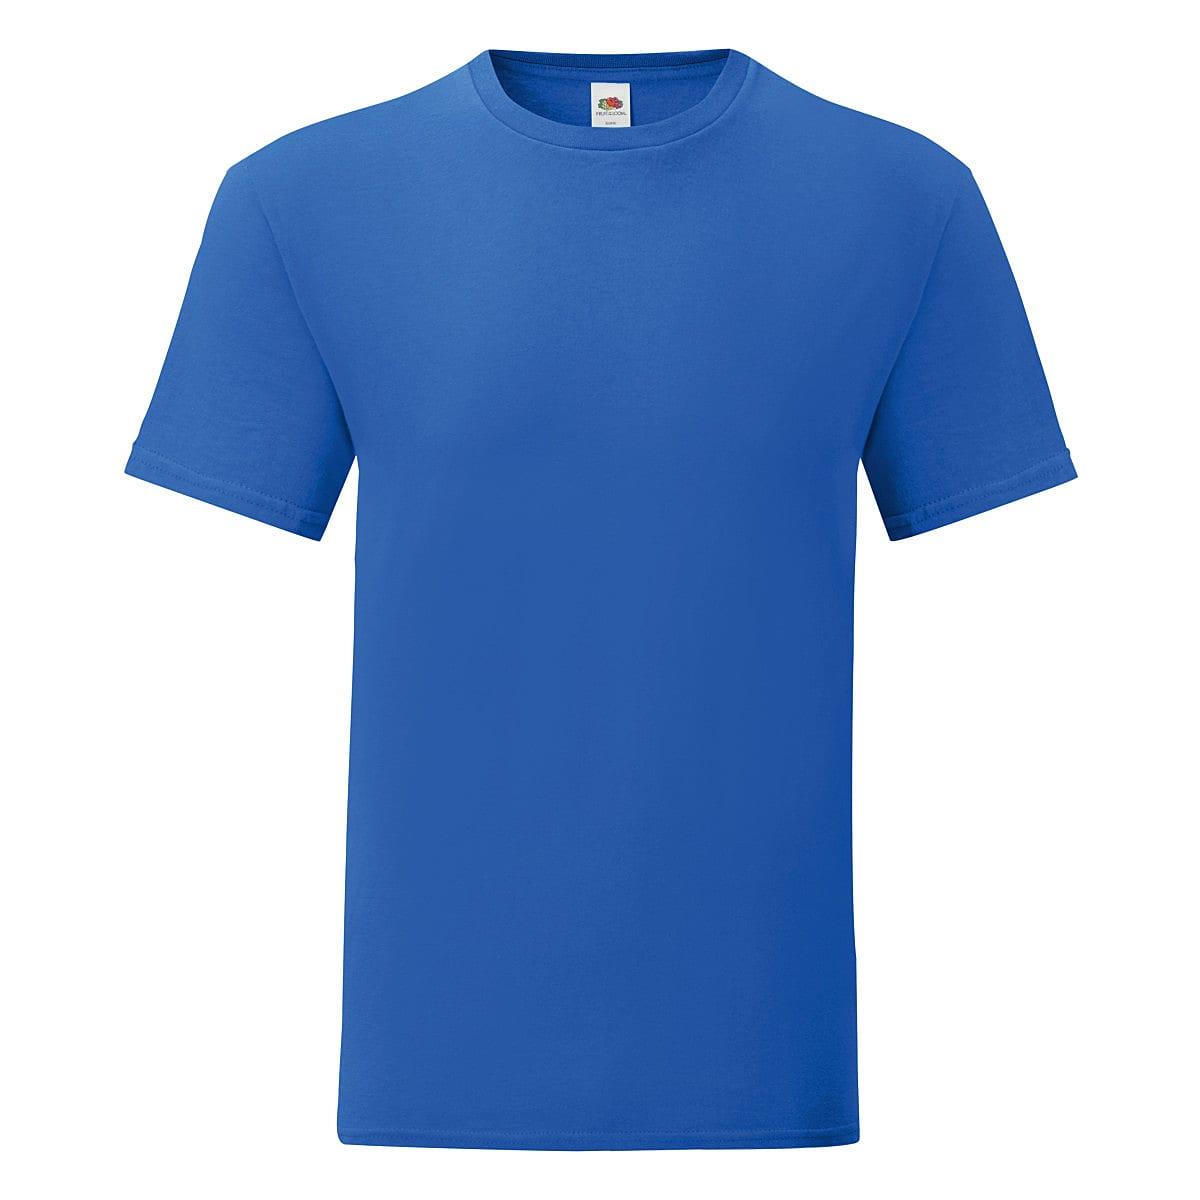 Fruit Of The Loom Mens Iconic T-Shirt in Royal Blue (Product Code: 61430)